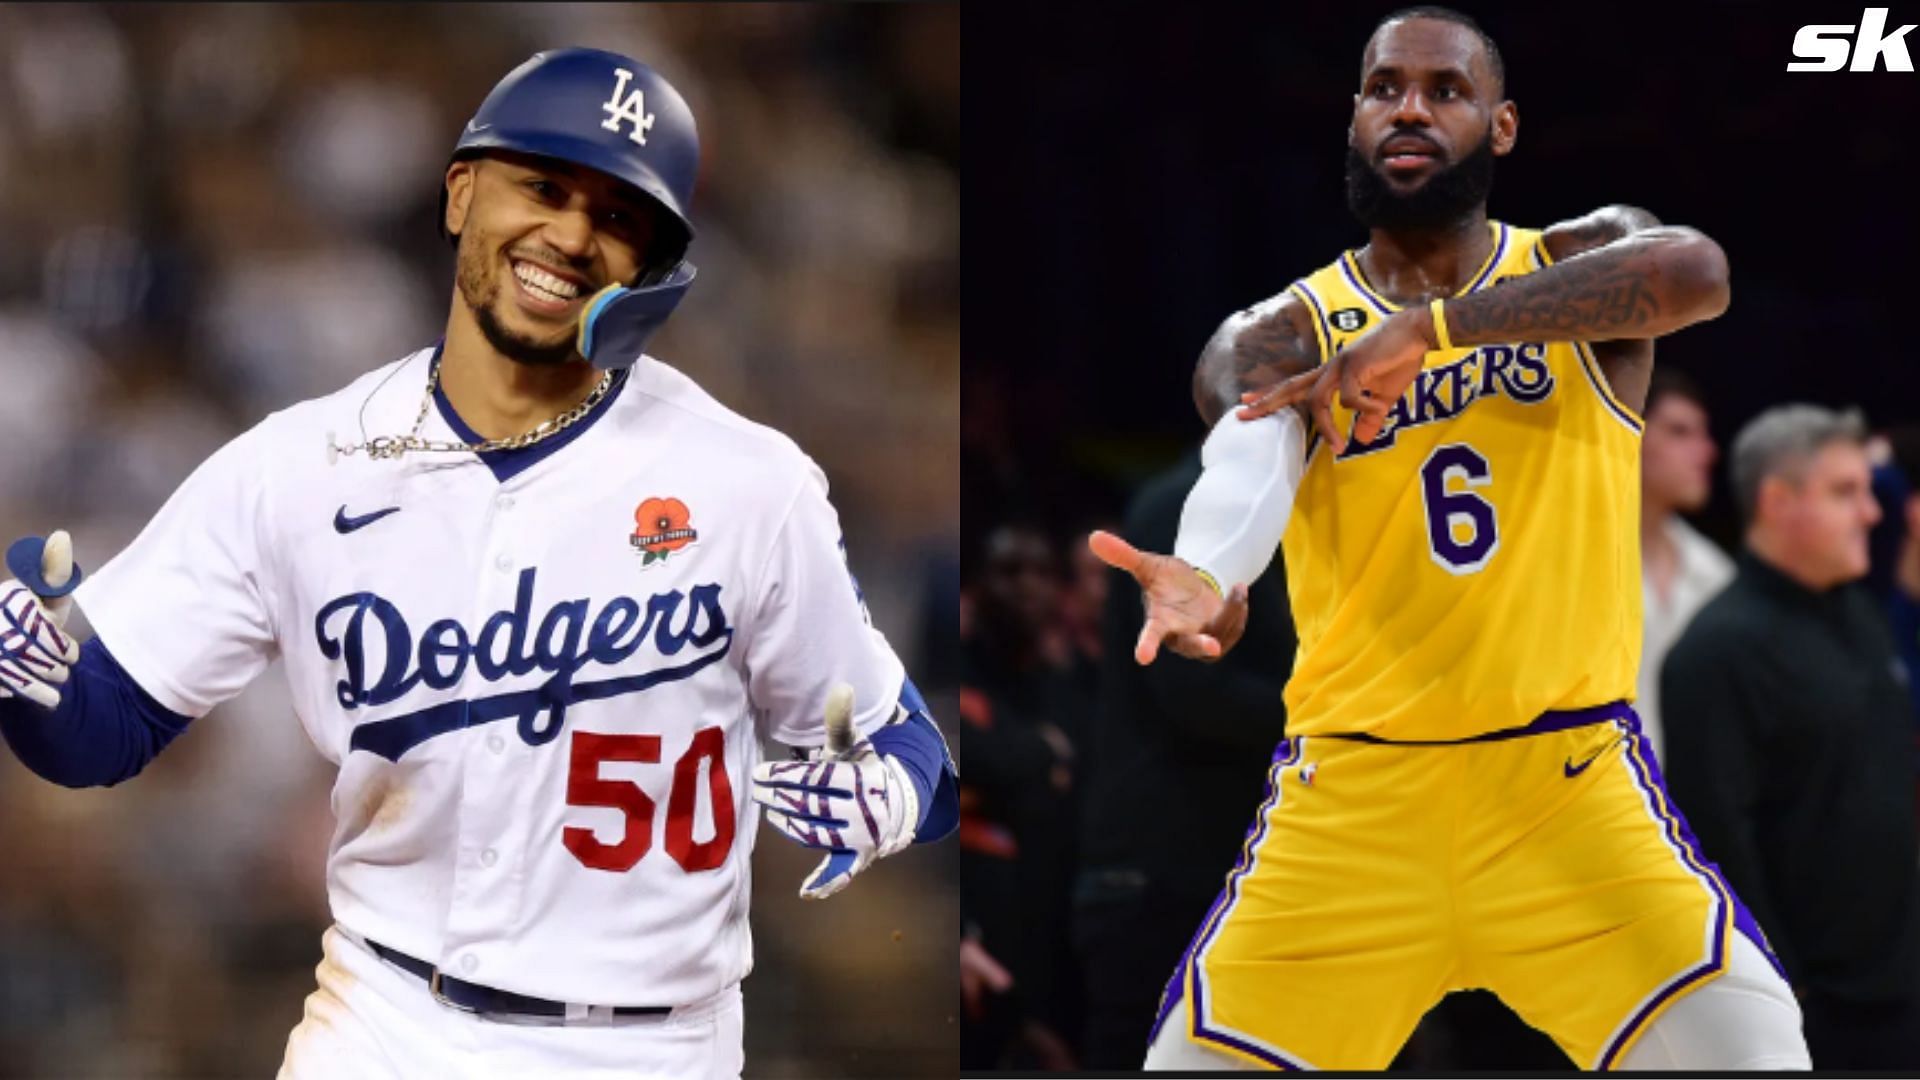 WATCH: NBA phenom LeBron James bows down to Mookie Betts after Dodgers star  slams homerun vs. Marlins